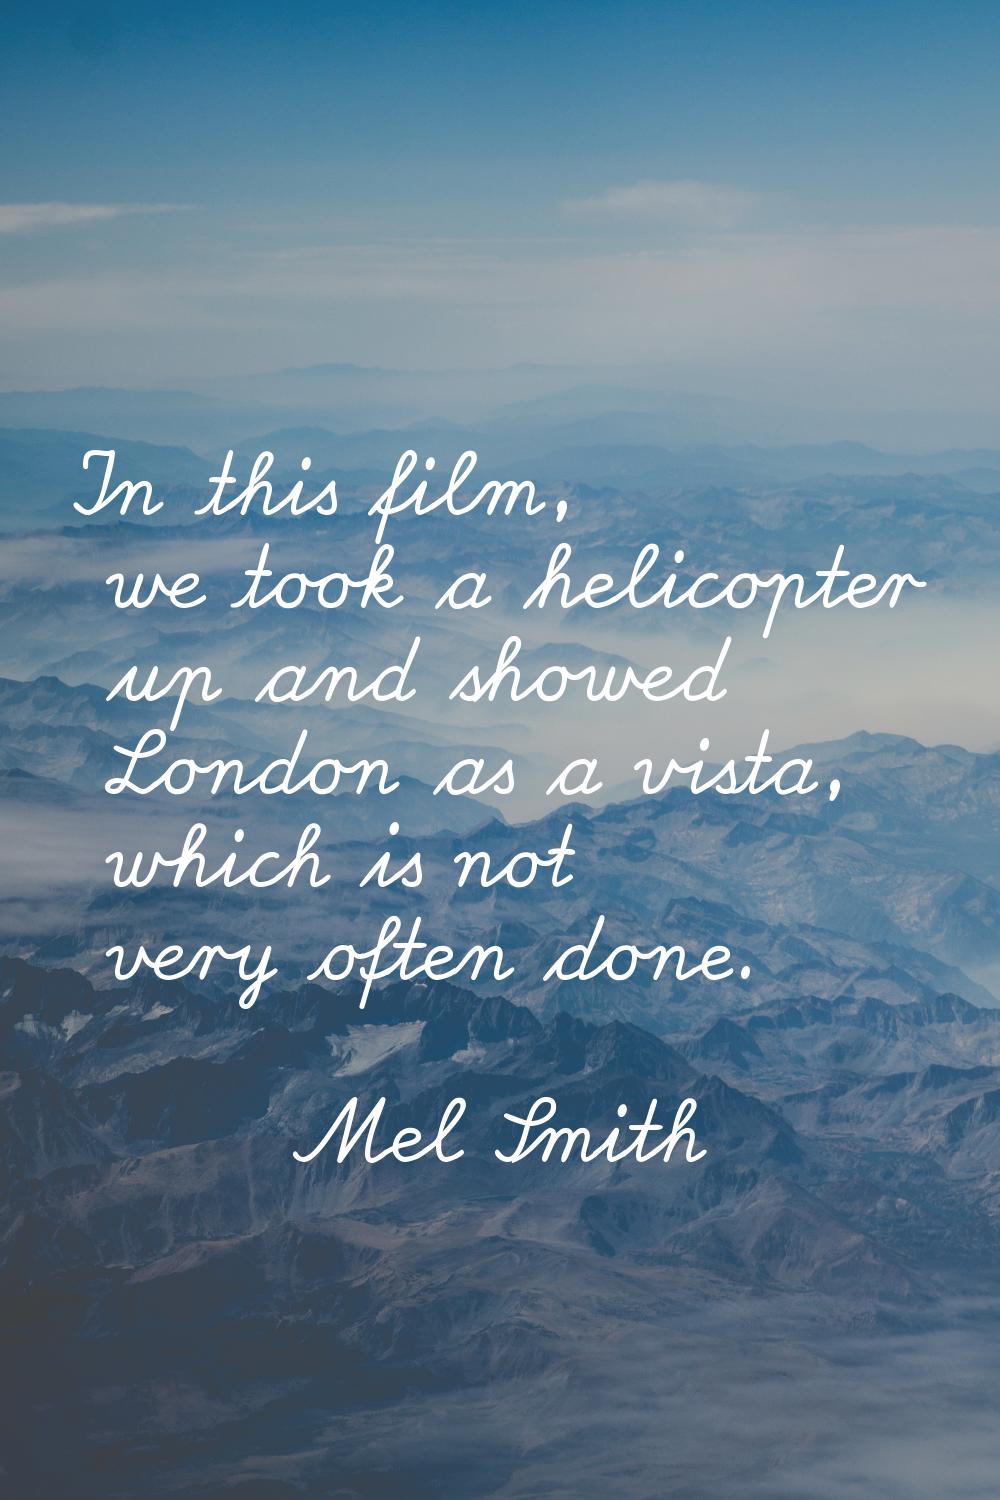 In this film, we took a helicopter up and showed London as a vista, which is not very often done.